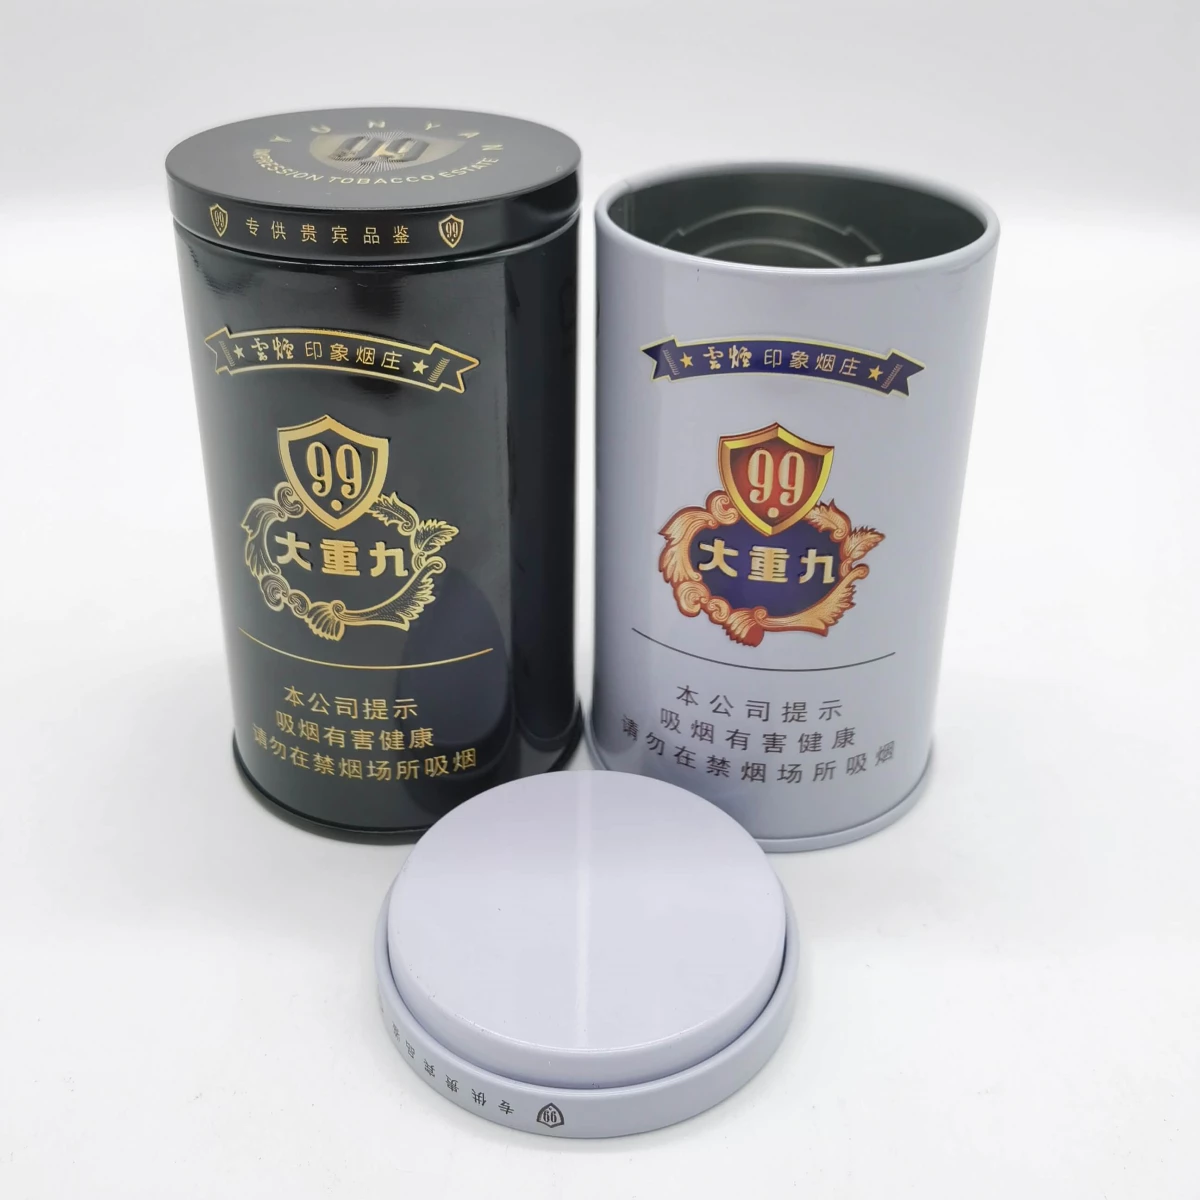 China RB002 Round cigarette tin can Manufacturers, Factory - Buy RB002 Round cigarette tin can at Good Price - Haohang